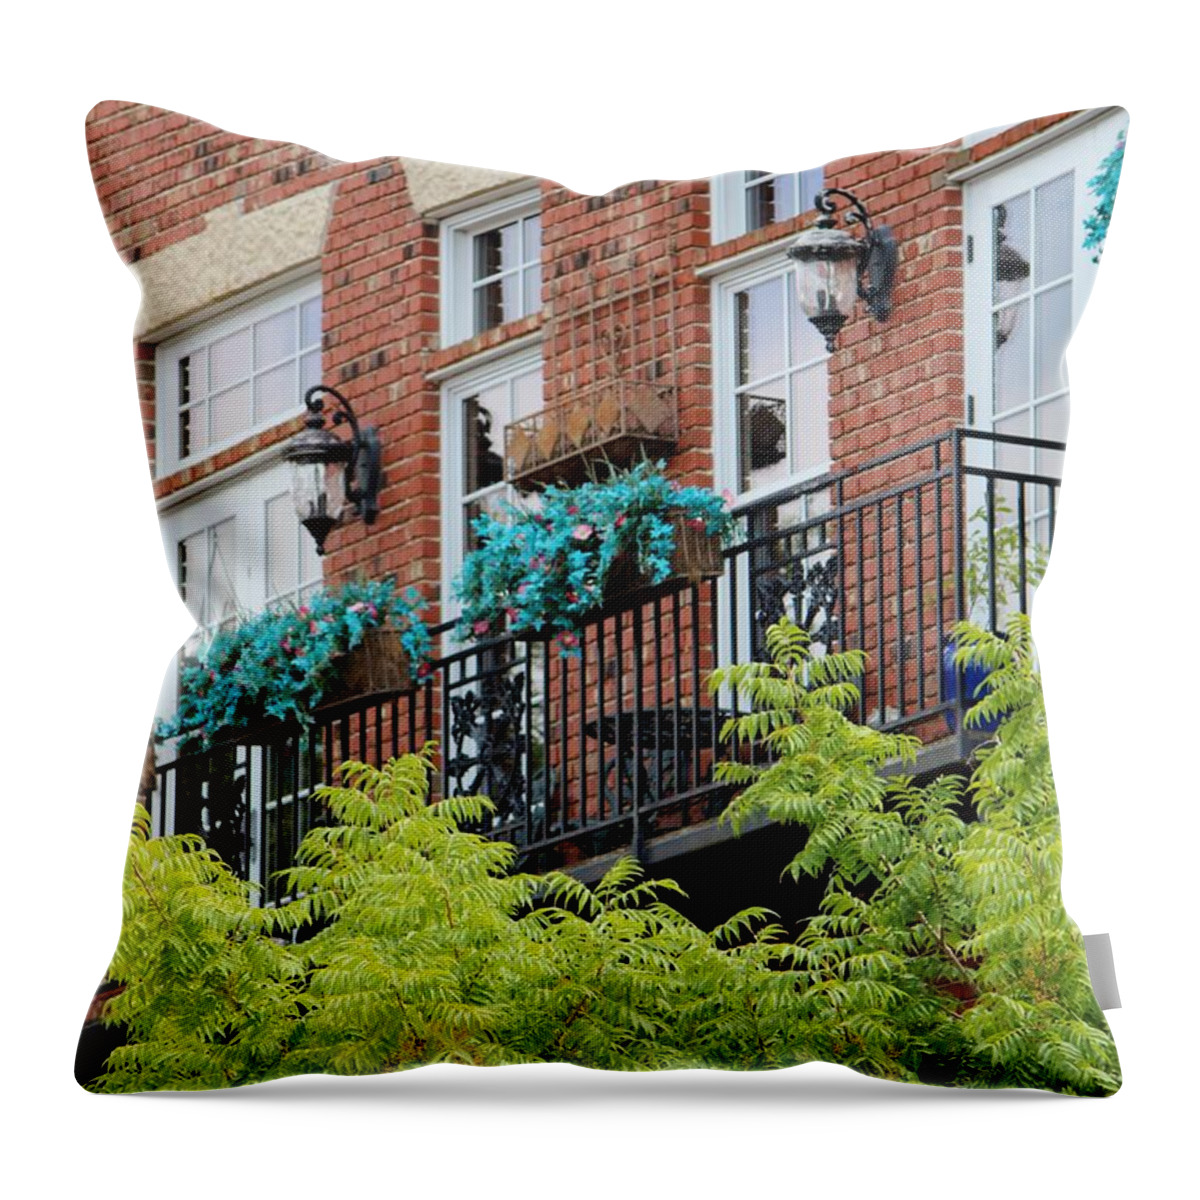 Balcony Throw Pillow featuring the photograph Blue Flowers On A Balcony by Cynthia Guinn